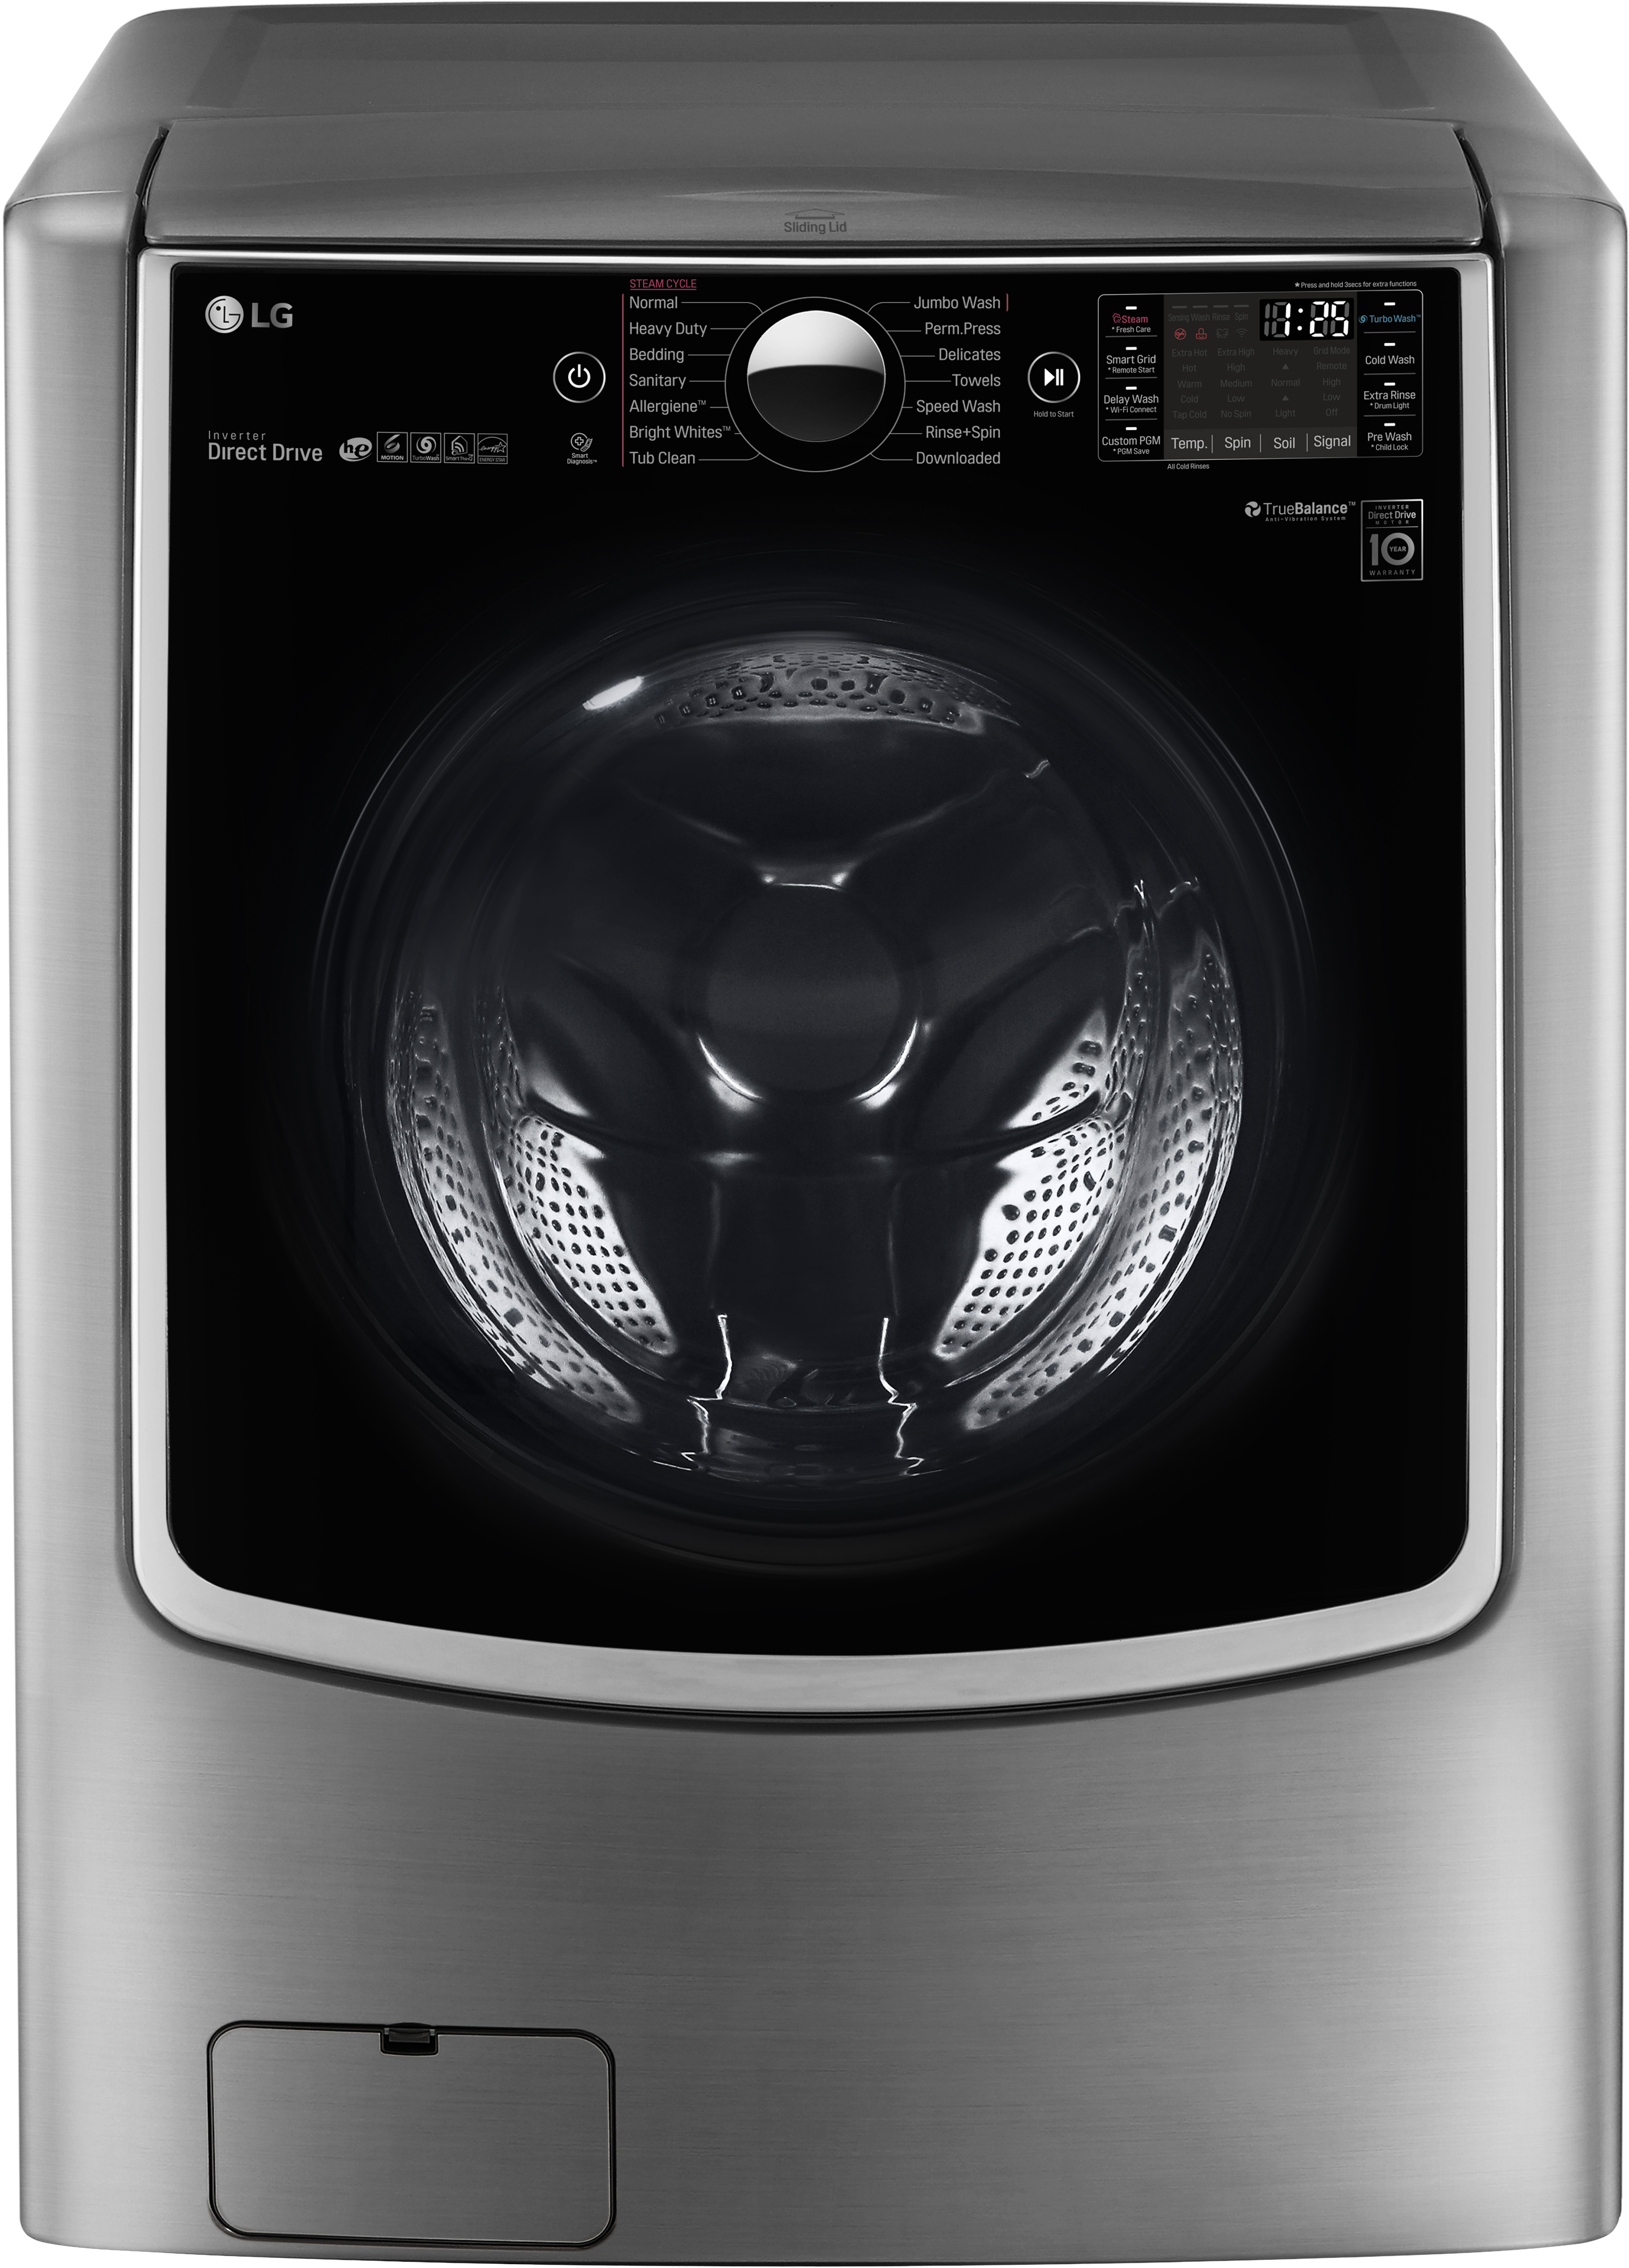 Lg Wm9000hva 29 Inch 5 2 Cu Ft Front Load Washer With Senseclean Smart Thinq Wi Fi Turbowash 2 0 14 Wash Programs 1 300 Rpm Compatible With Lg Twin Wash Lcd Control Panel Neverust Stainless